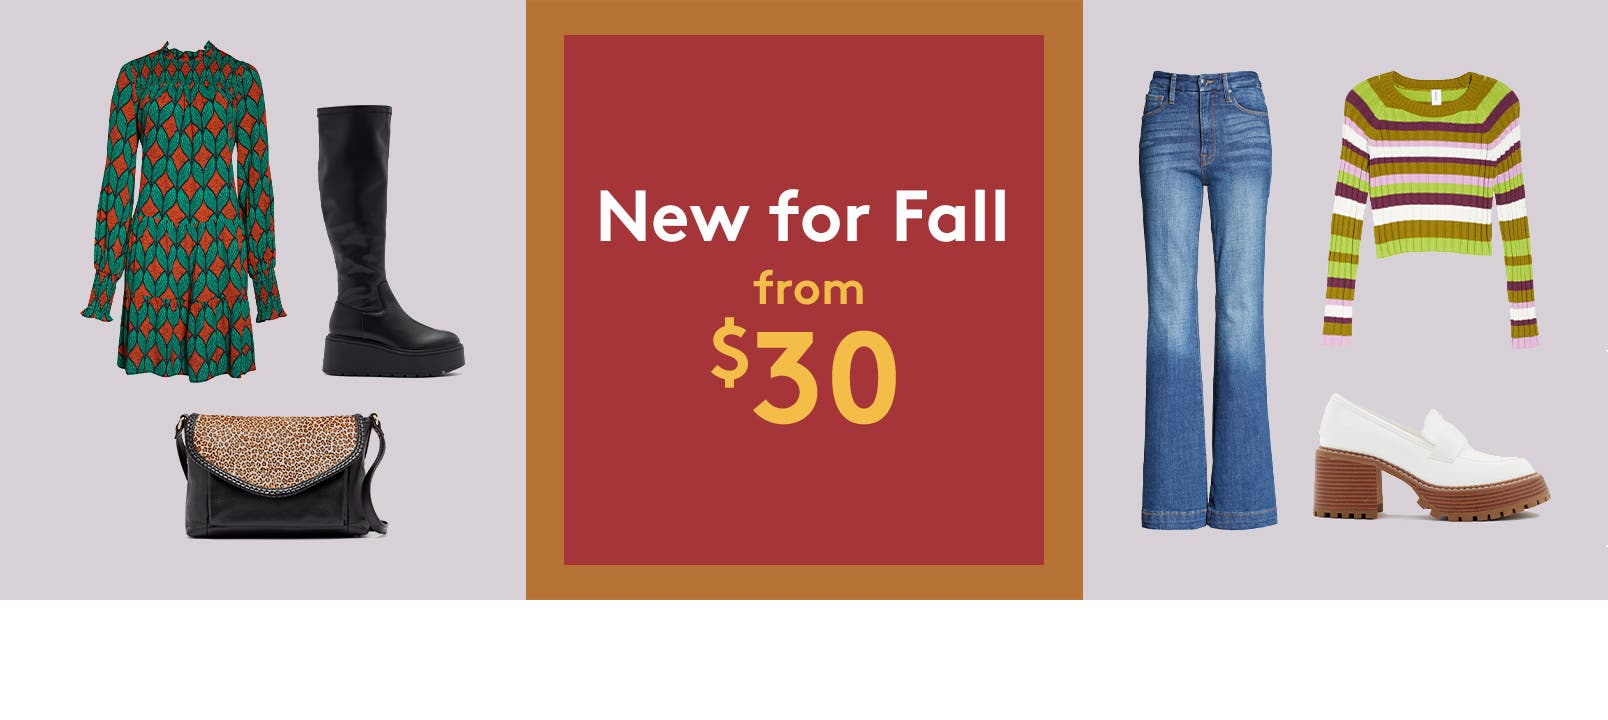 New arrivals for fall.